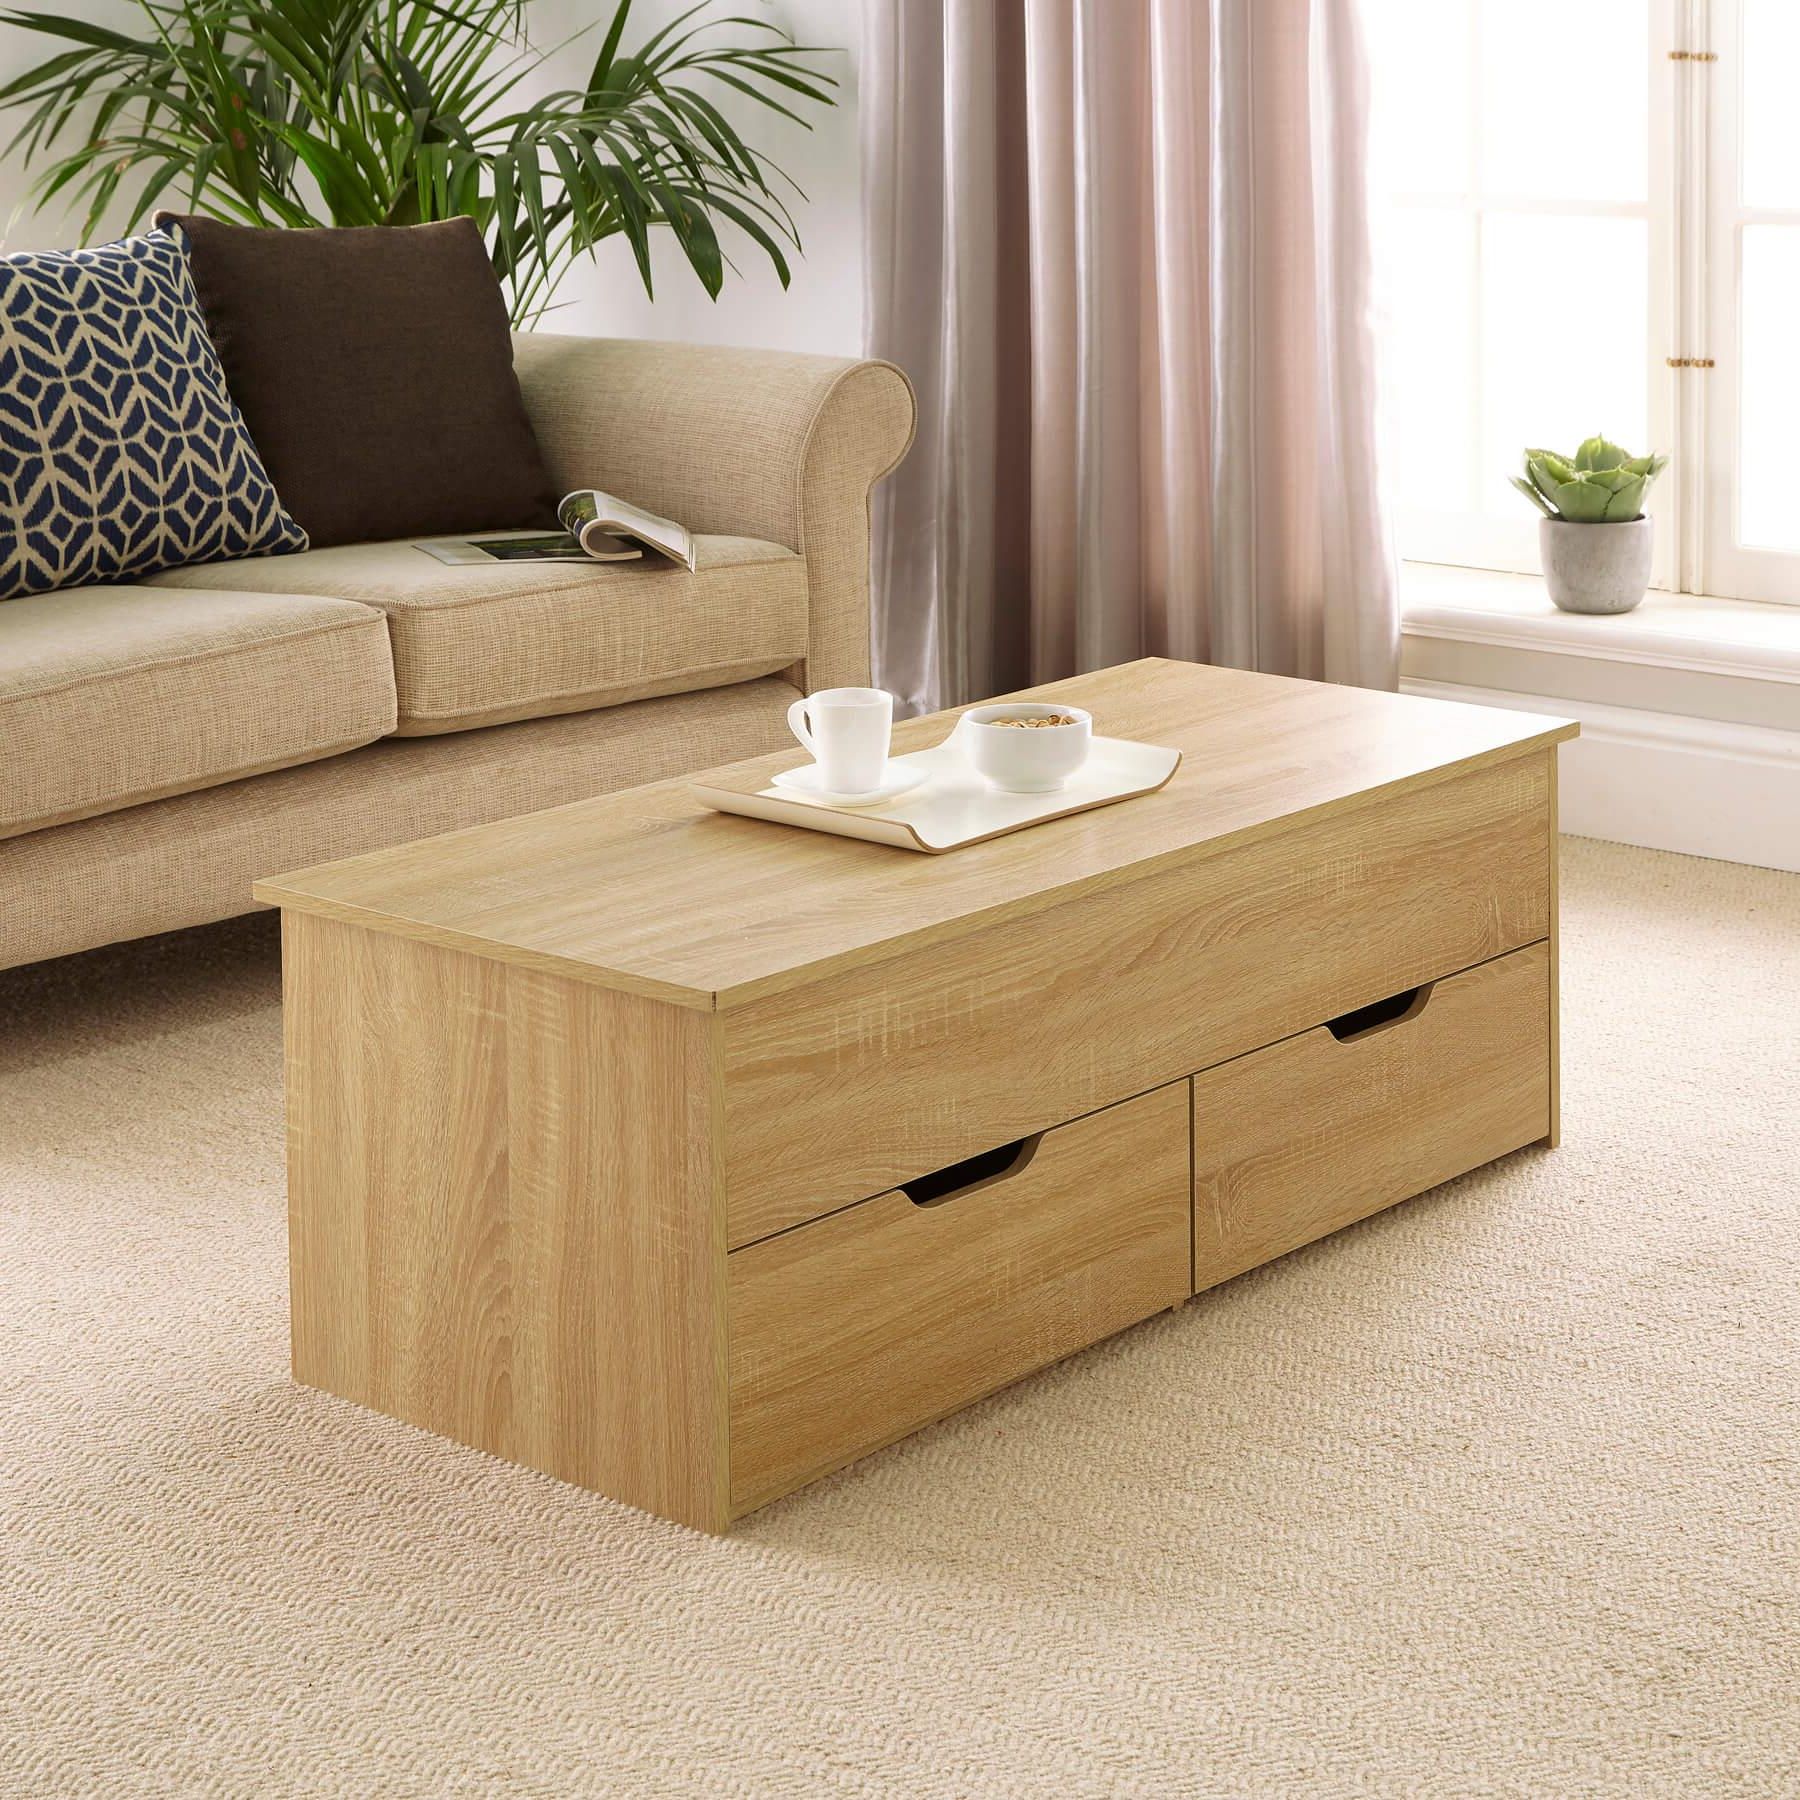 Most Up To Date Oak Wooden Coffee Table With Lift Up Top And 2 Large Storage Drawers With Lift Top Coffee Tables With Storage Drawers (View 5 of 15)